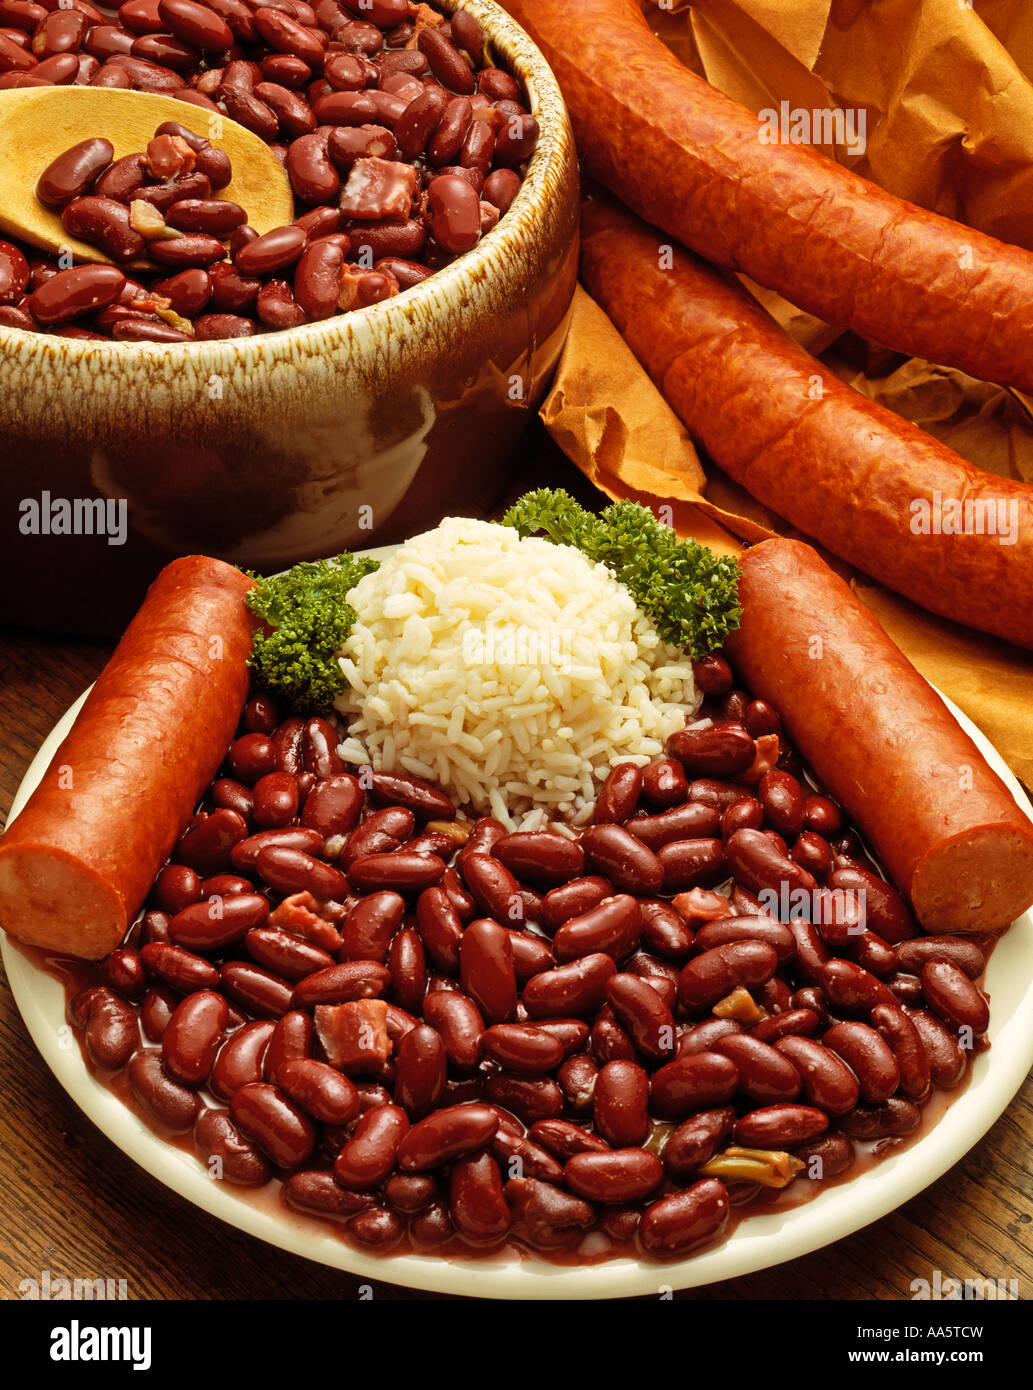 chili kidney beans sausage rice plate brown kraft wrapping paper bowl culinary ethnic Stock Photo